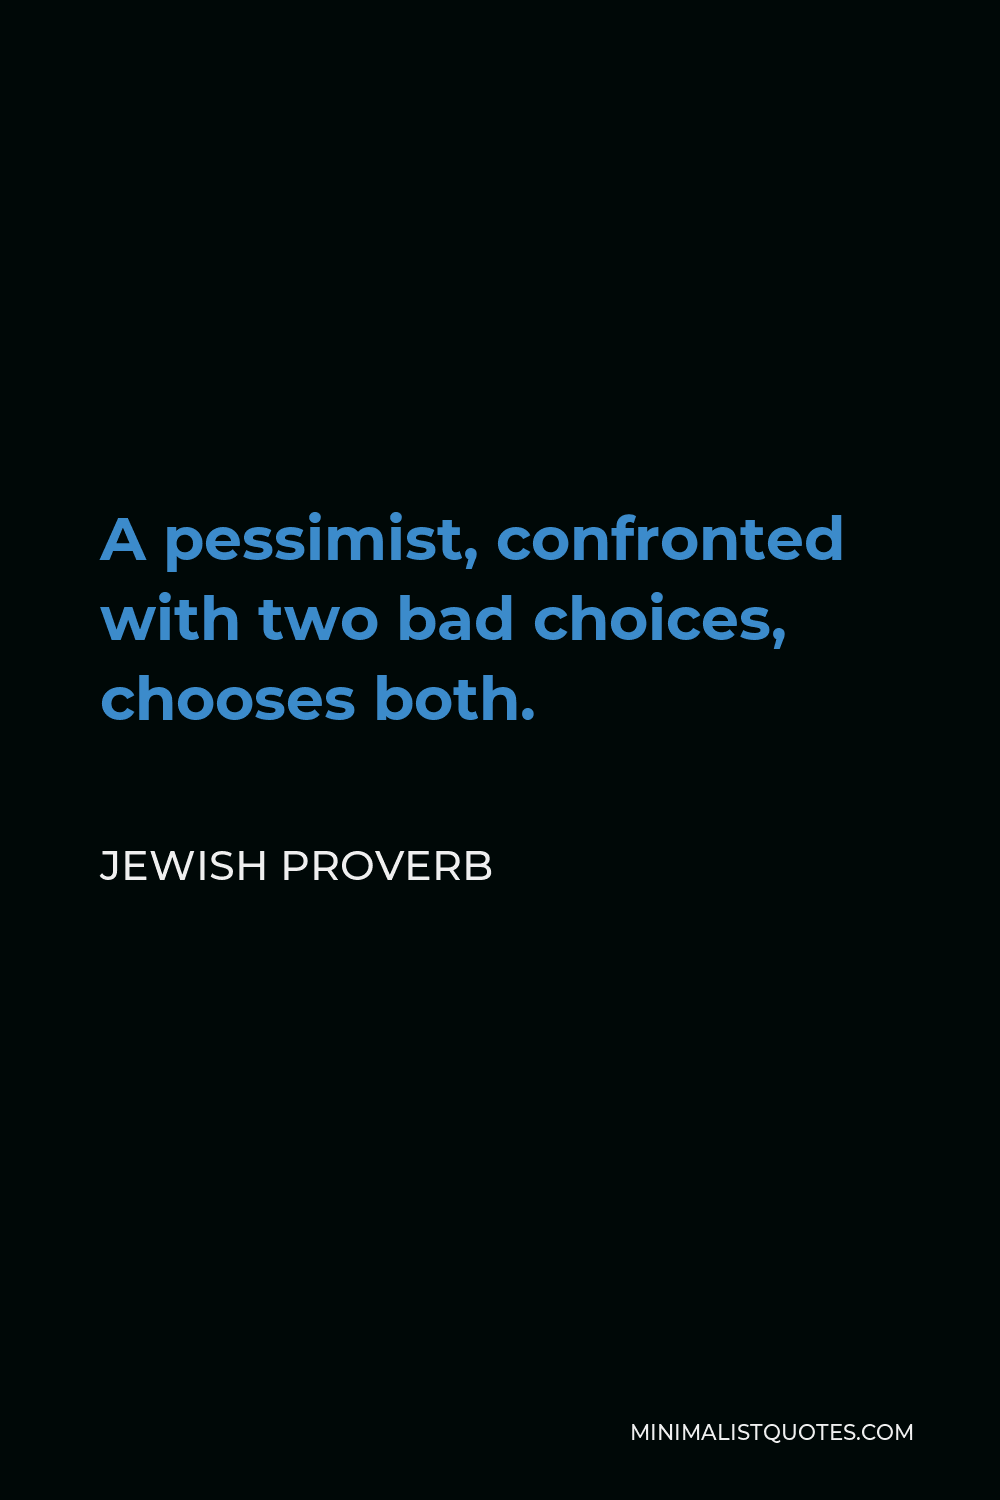 Jewish Proverb Quote - A pessimist, confronted with two bad choices, chooses both.